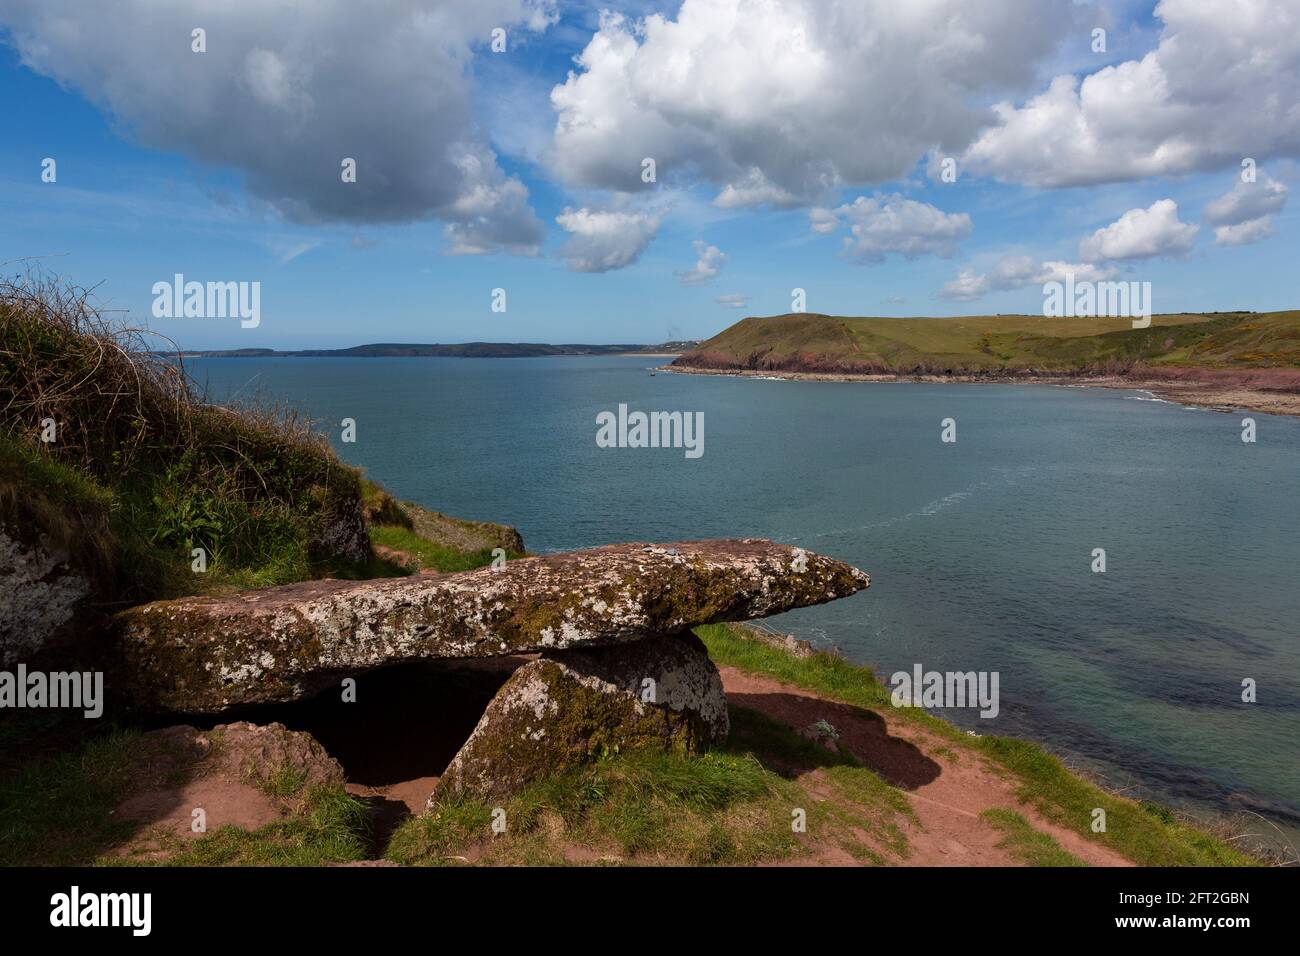 View of King's Quoit pre-historic burial chamber, sea and cliffs on Pembrokeshire Coastal Path near Tenby and Manorbier, Wales Stock Photo